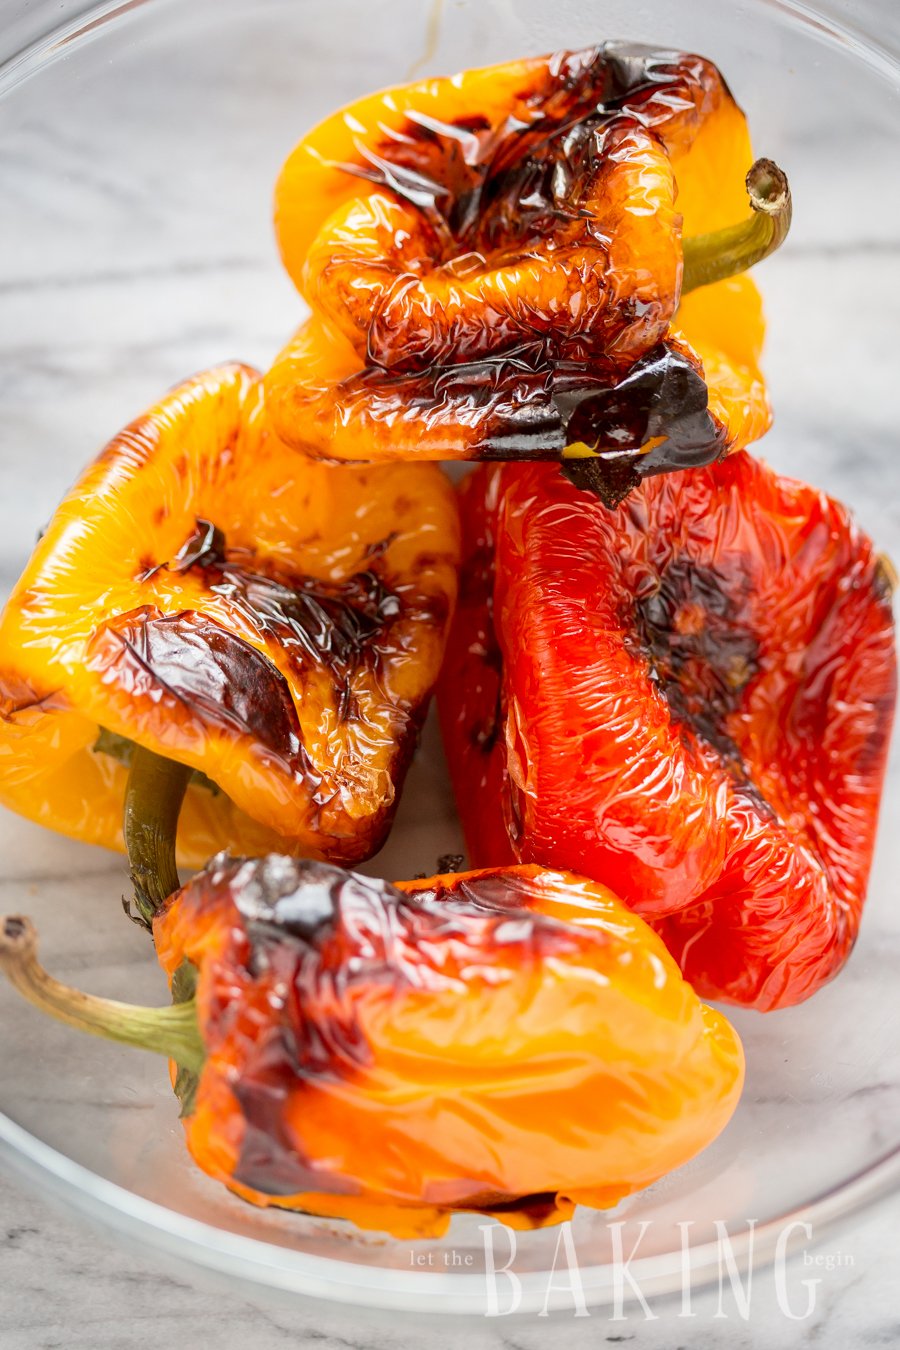 Roasted bell peppers in a glass bowl.